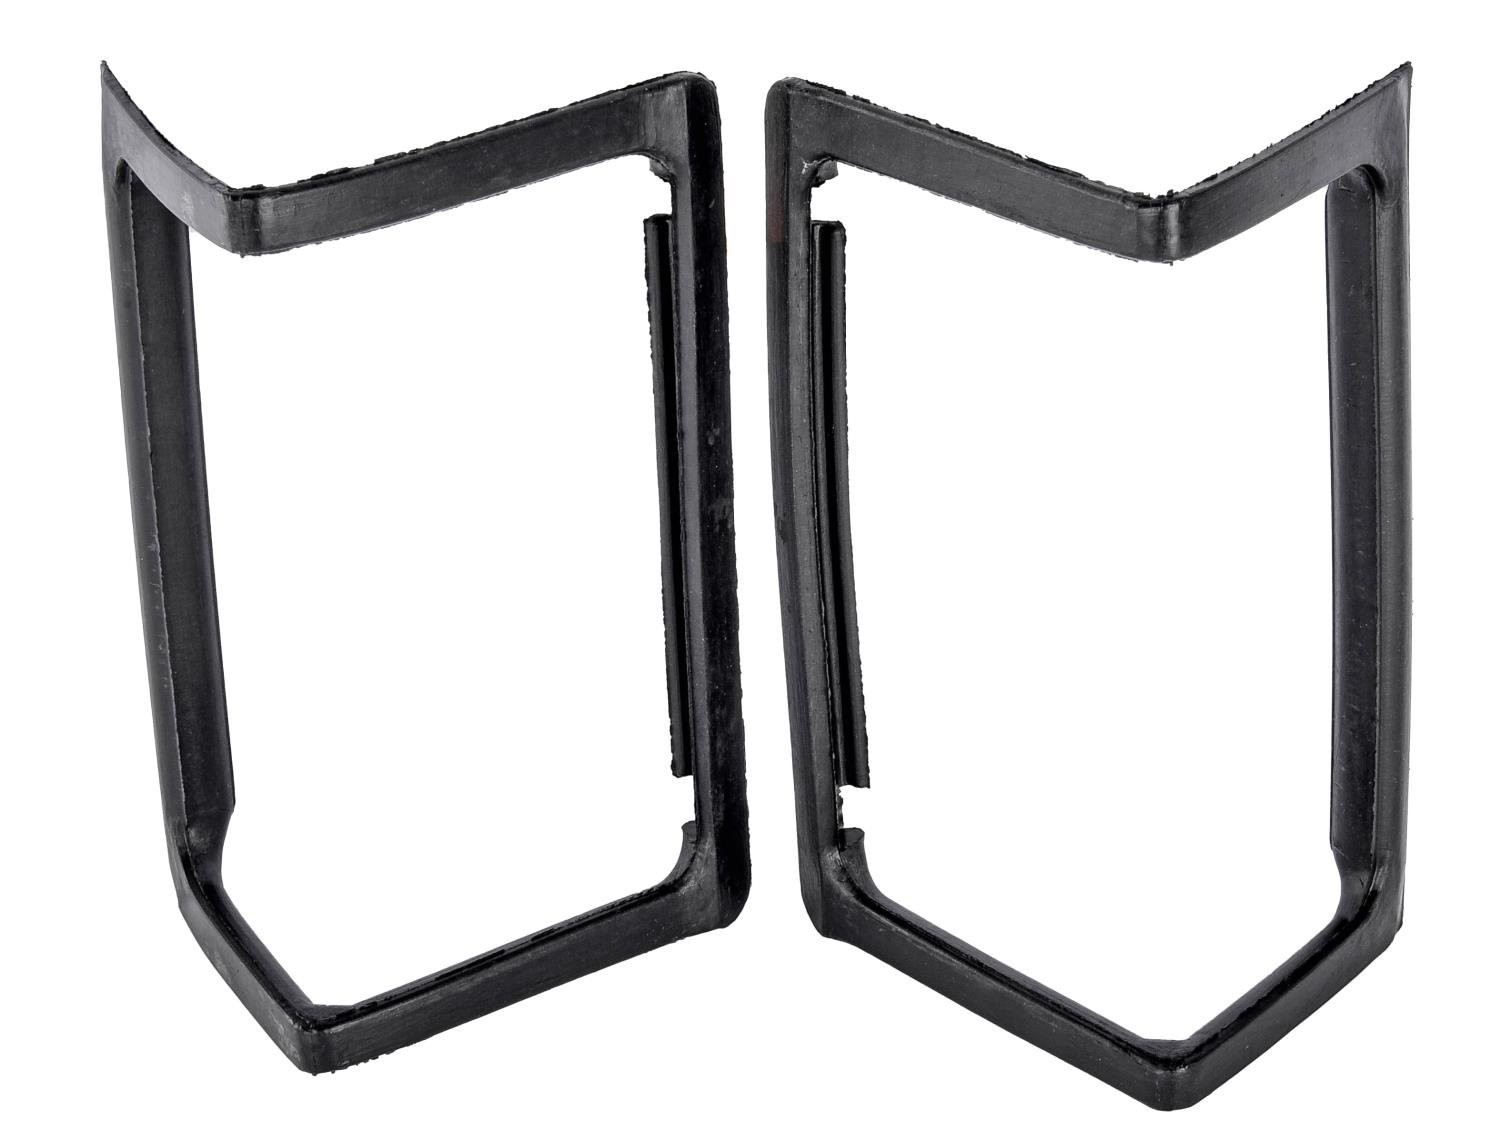 Tail Light Housing Gaskets for 1968-1969 Chevrolet Chevelle Station Wagon, El Camino